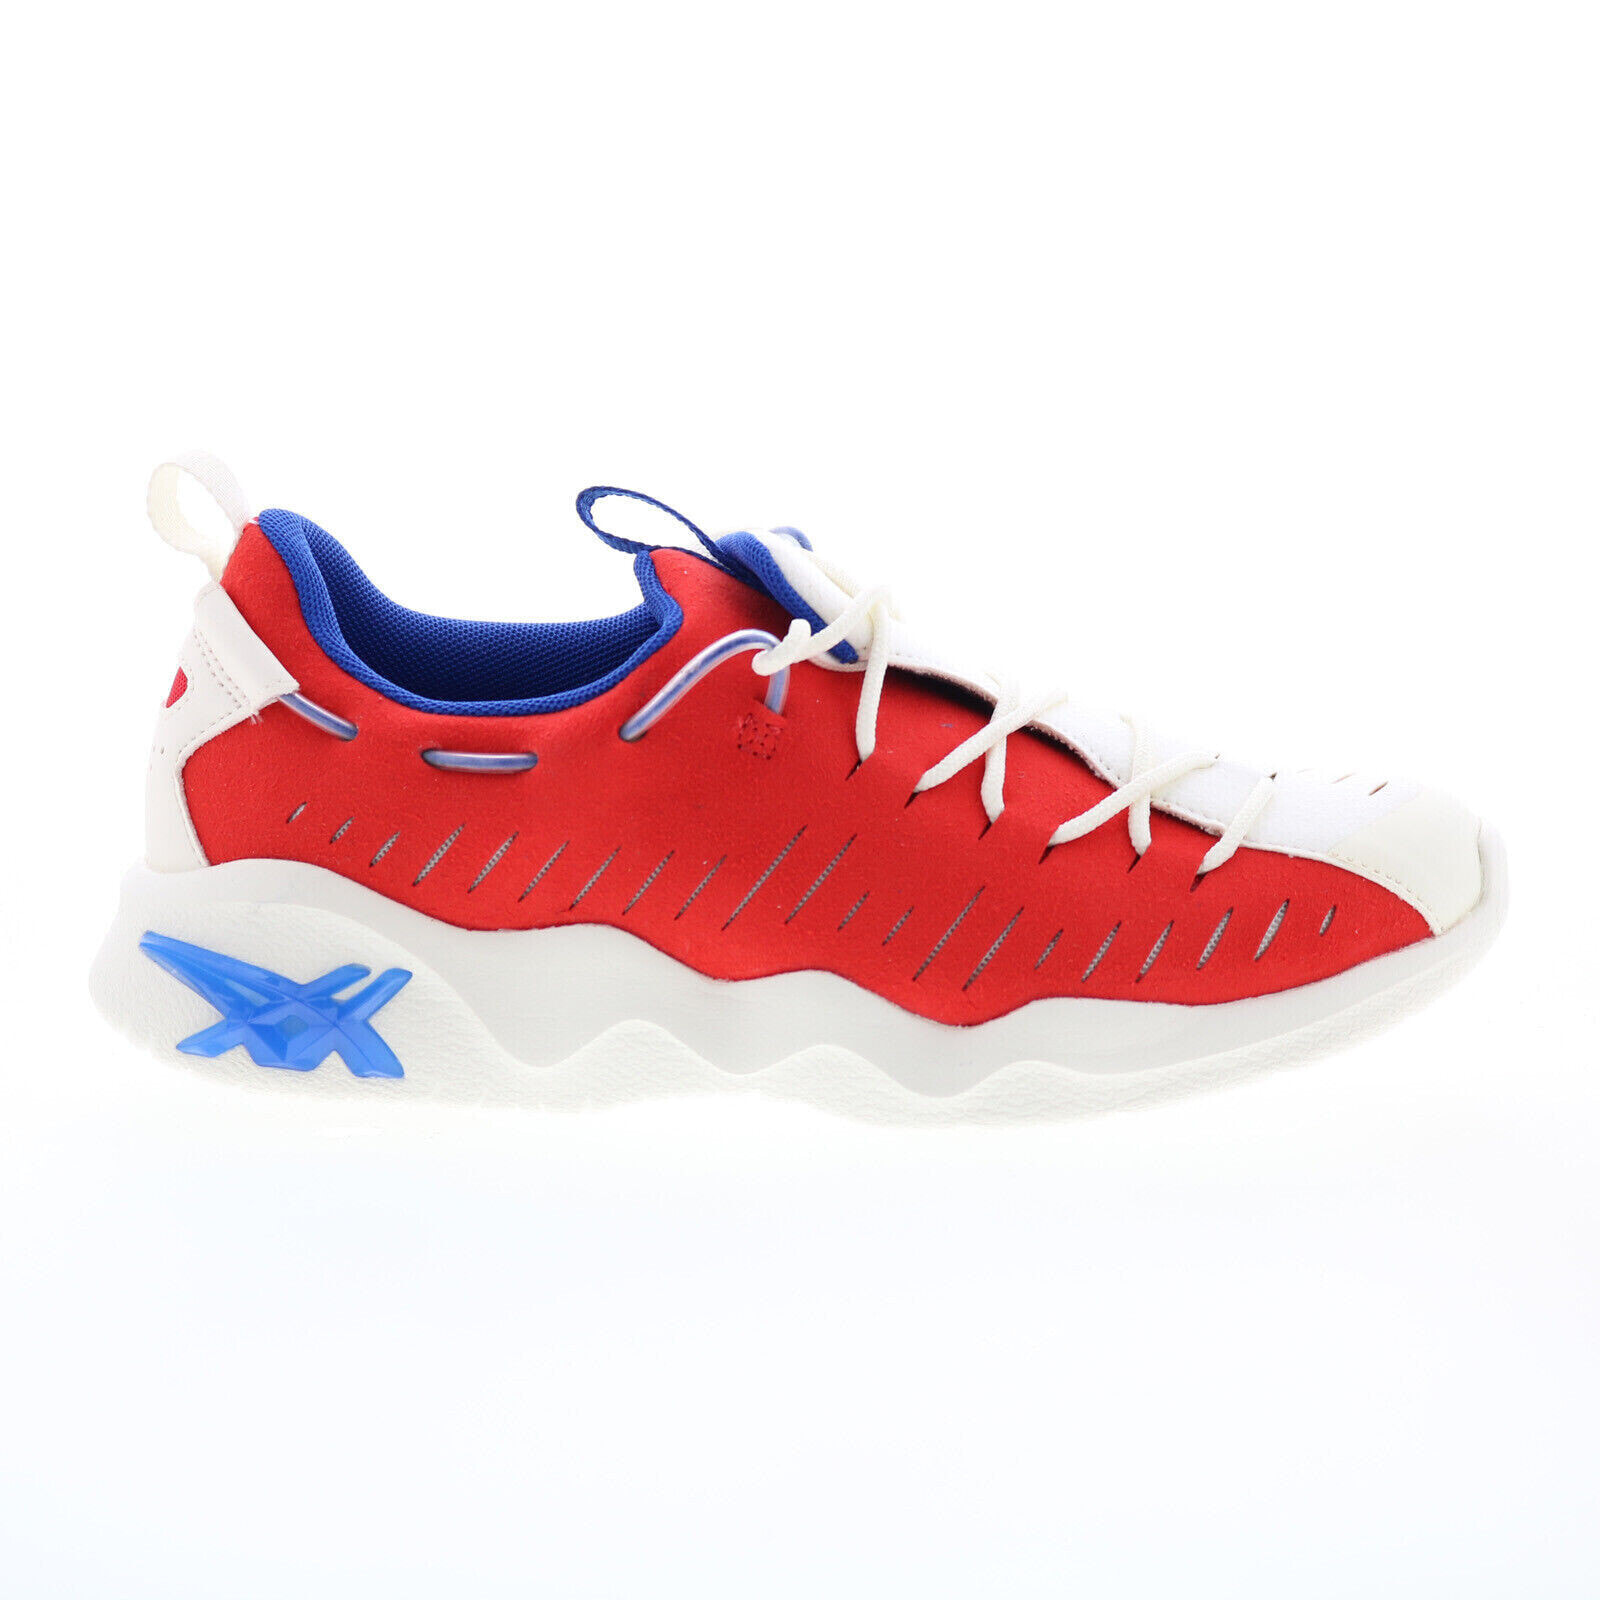 Asics Gel-Mai RB H802N-100 Mens Red Synthetic Lifestyle Sneakers Shoes 6